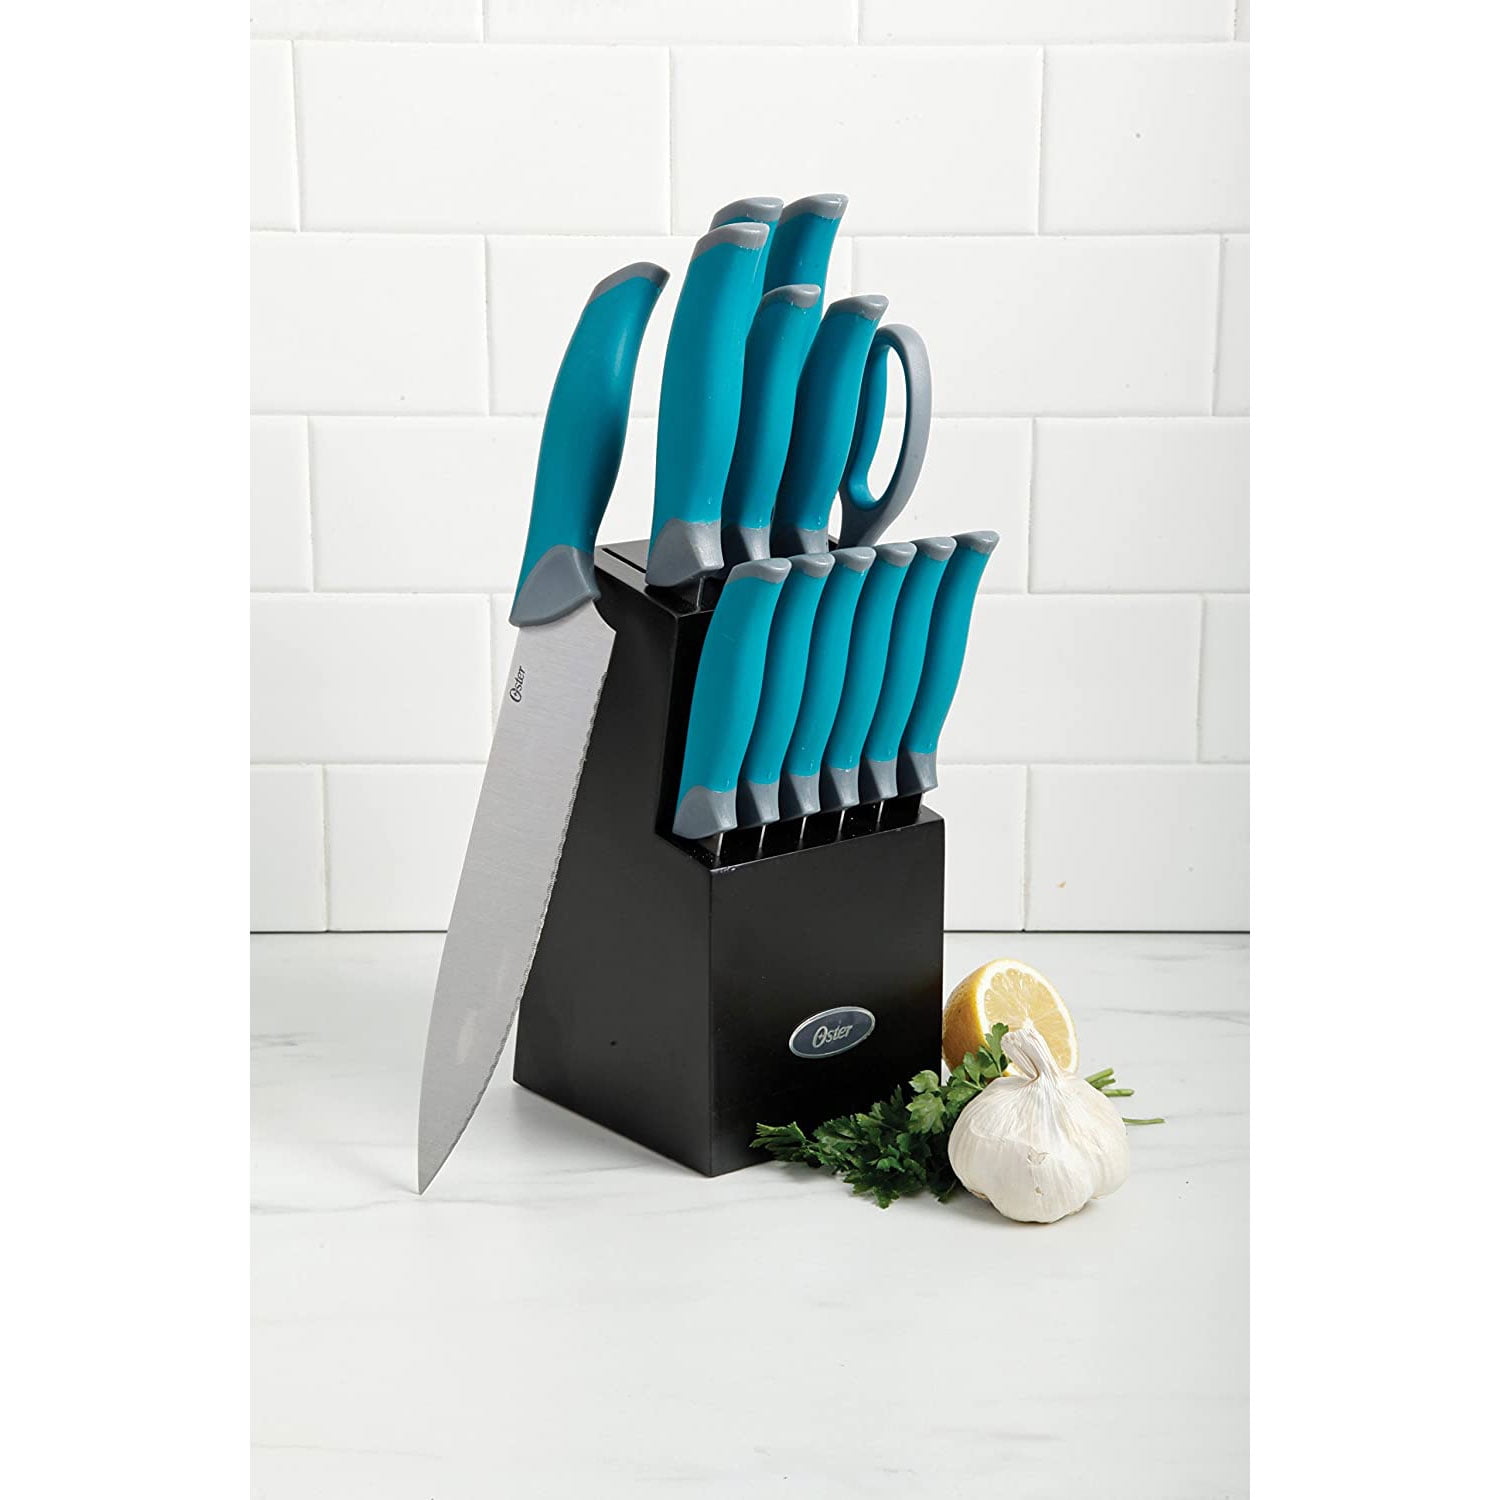 Oster Wellisford High-Carbon Stainless Steel Cutlery Set, 14-Piece,  Black/Silver